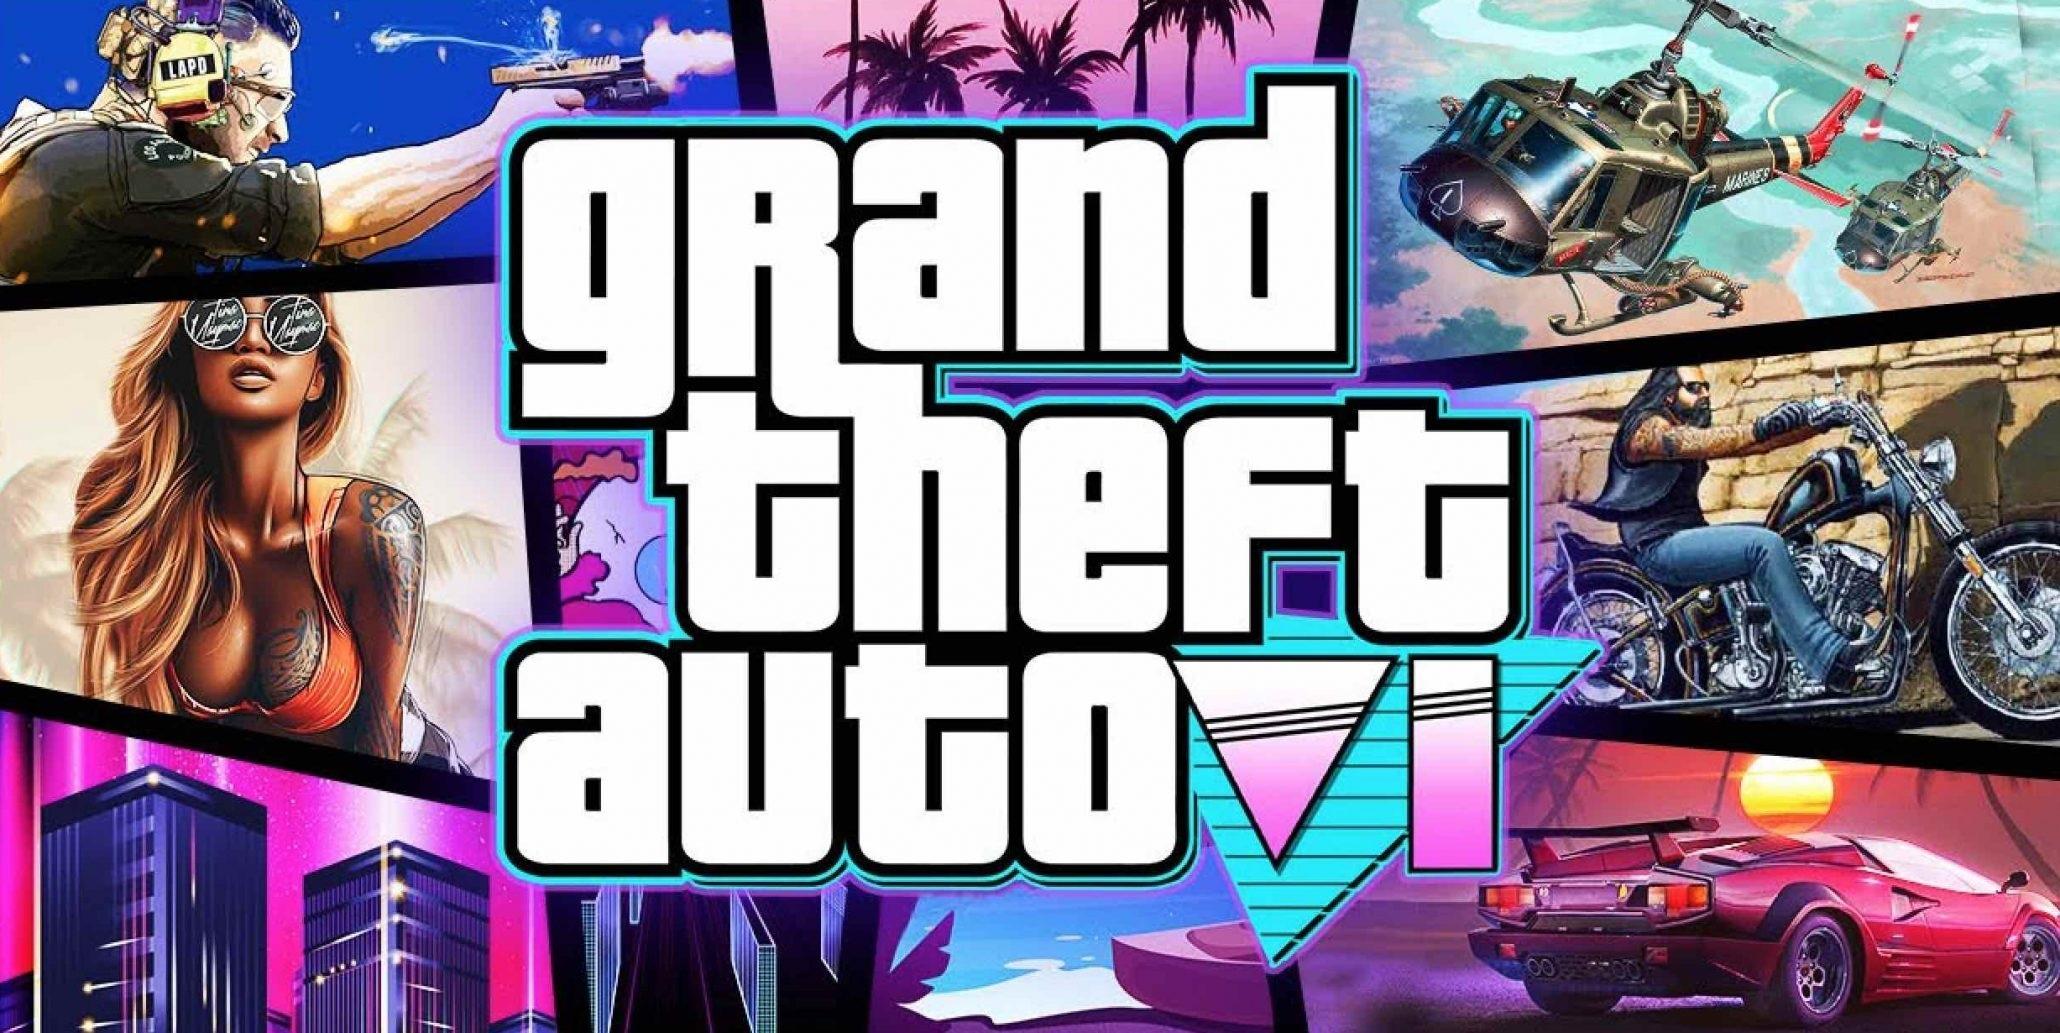 Download Menu and loading screen in the style of GTA 6 for GTA San